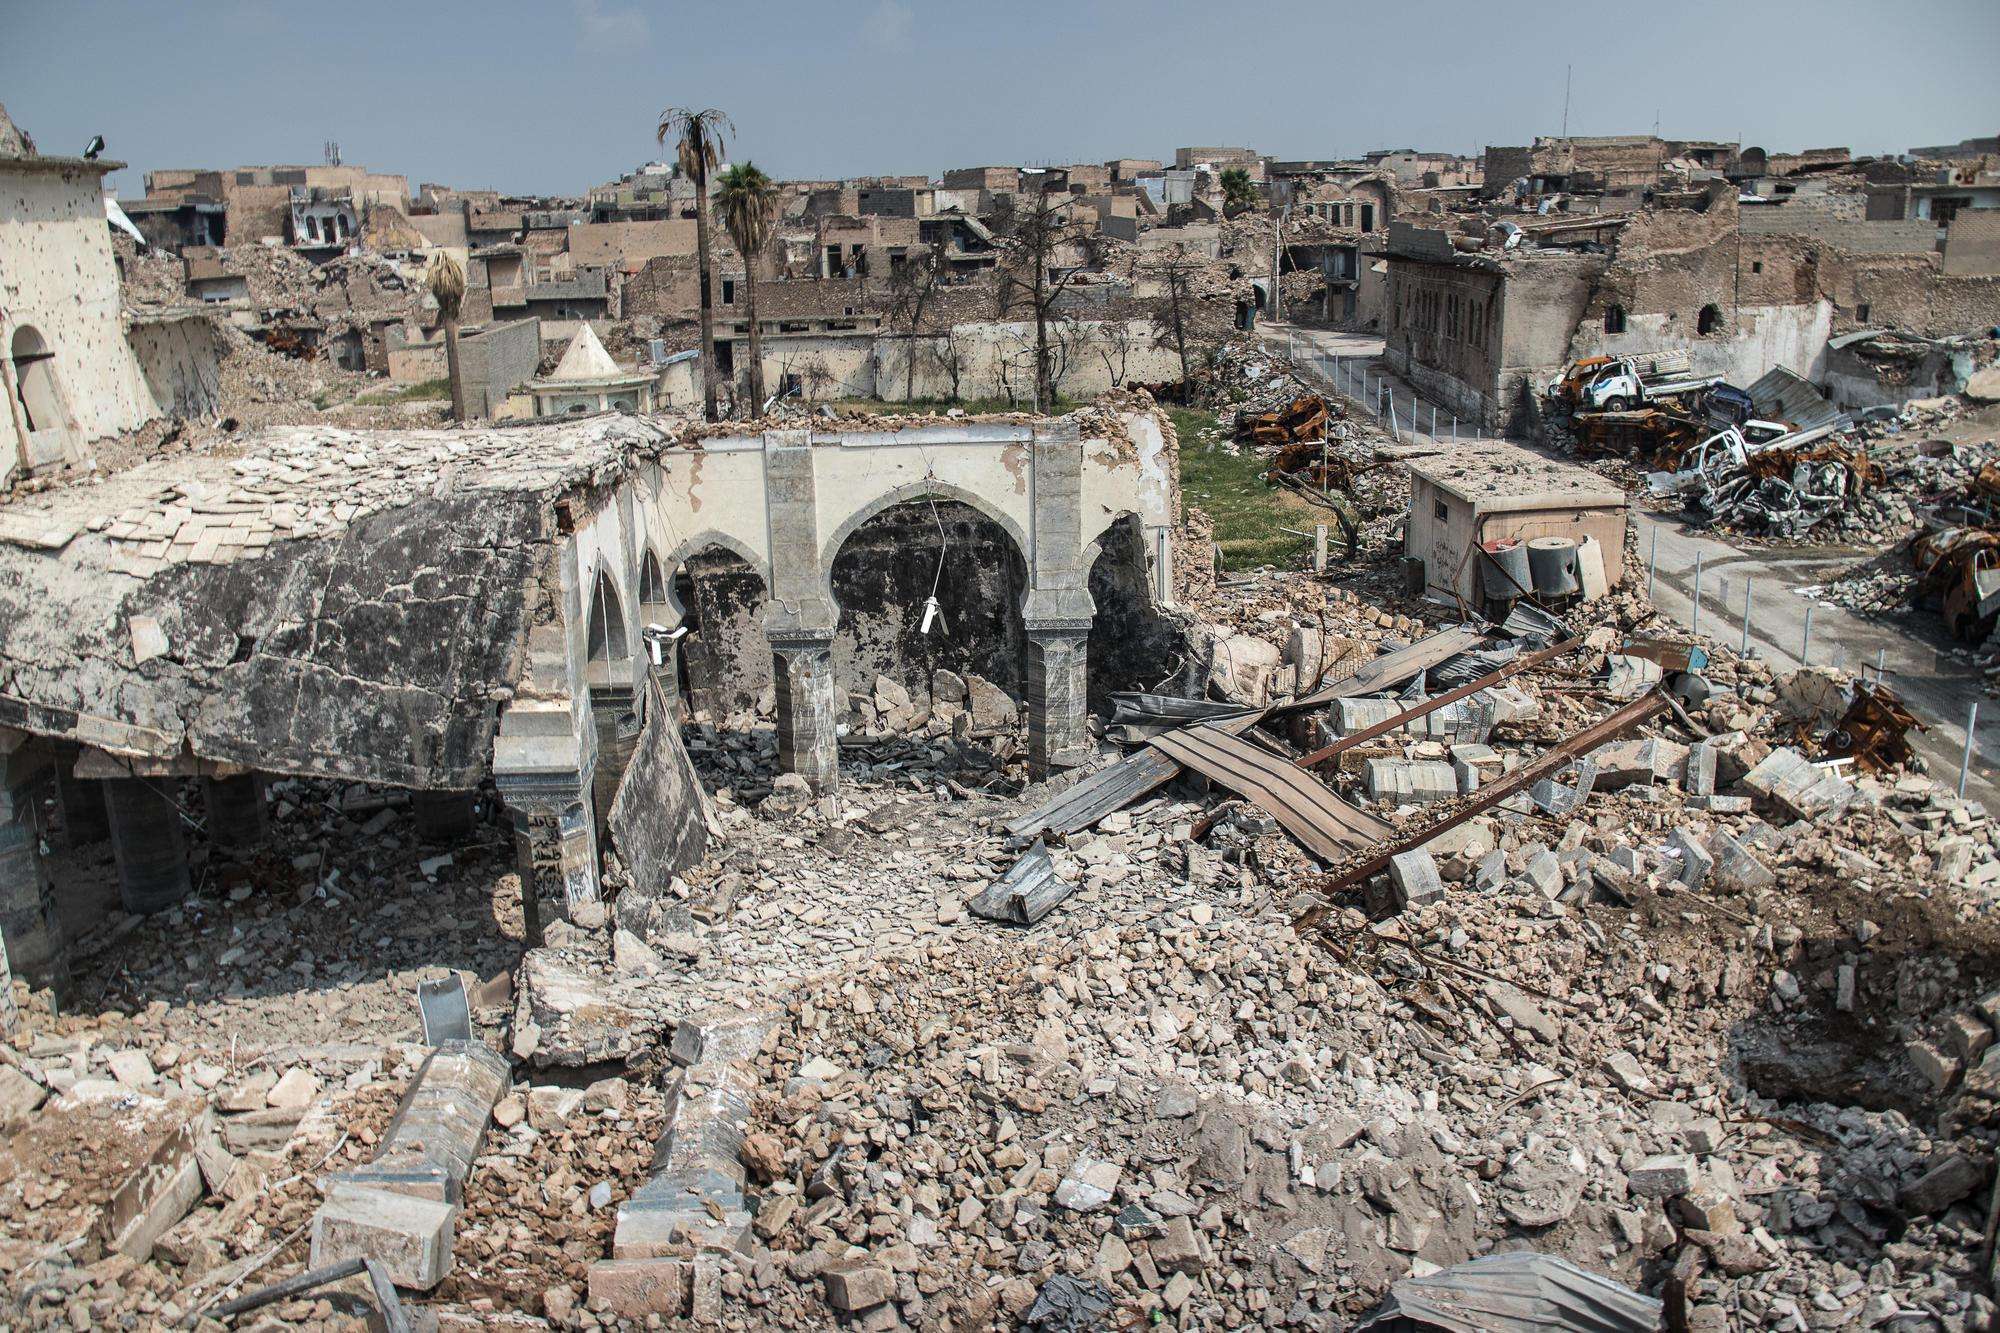 Wreckage in Mosul's Old City, Iraq